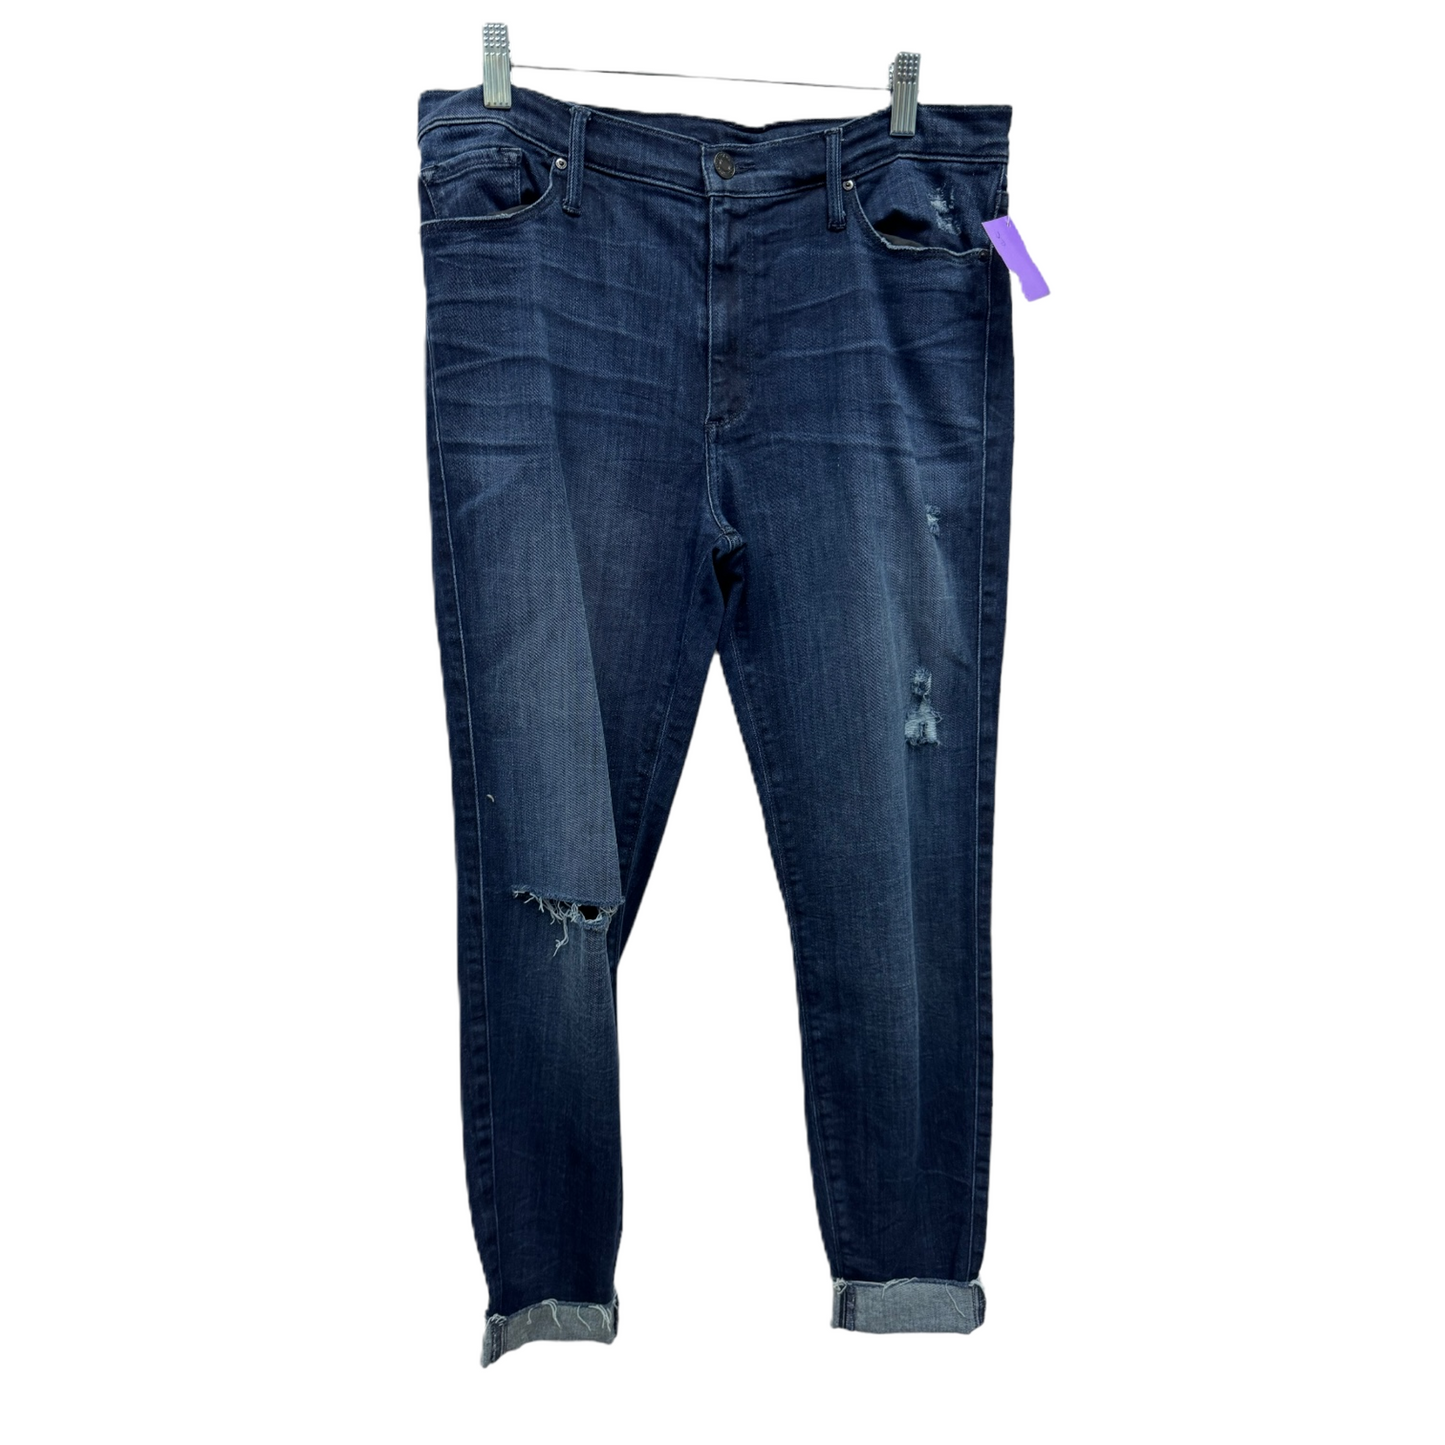 Jeans Skinny By Black Orchid  Size: 12